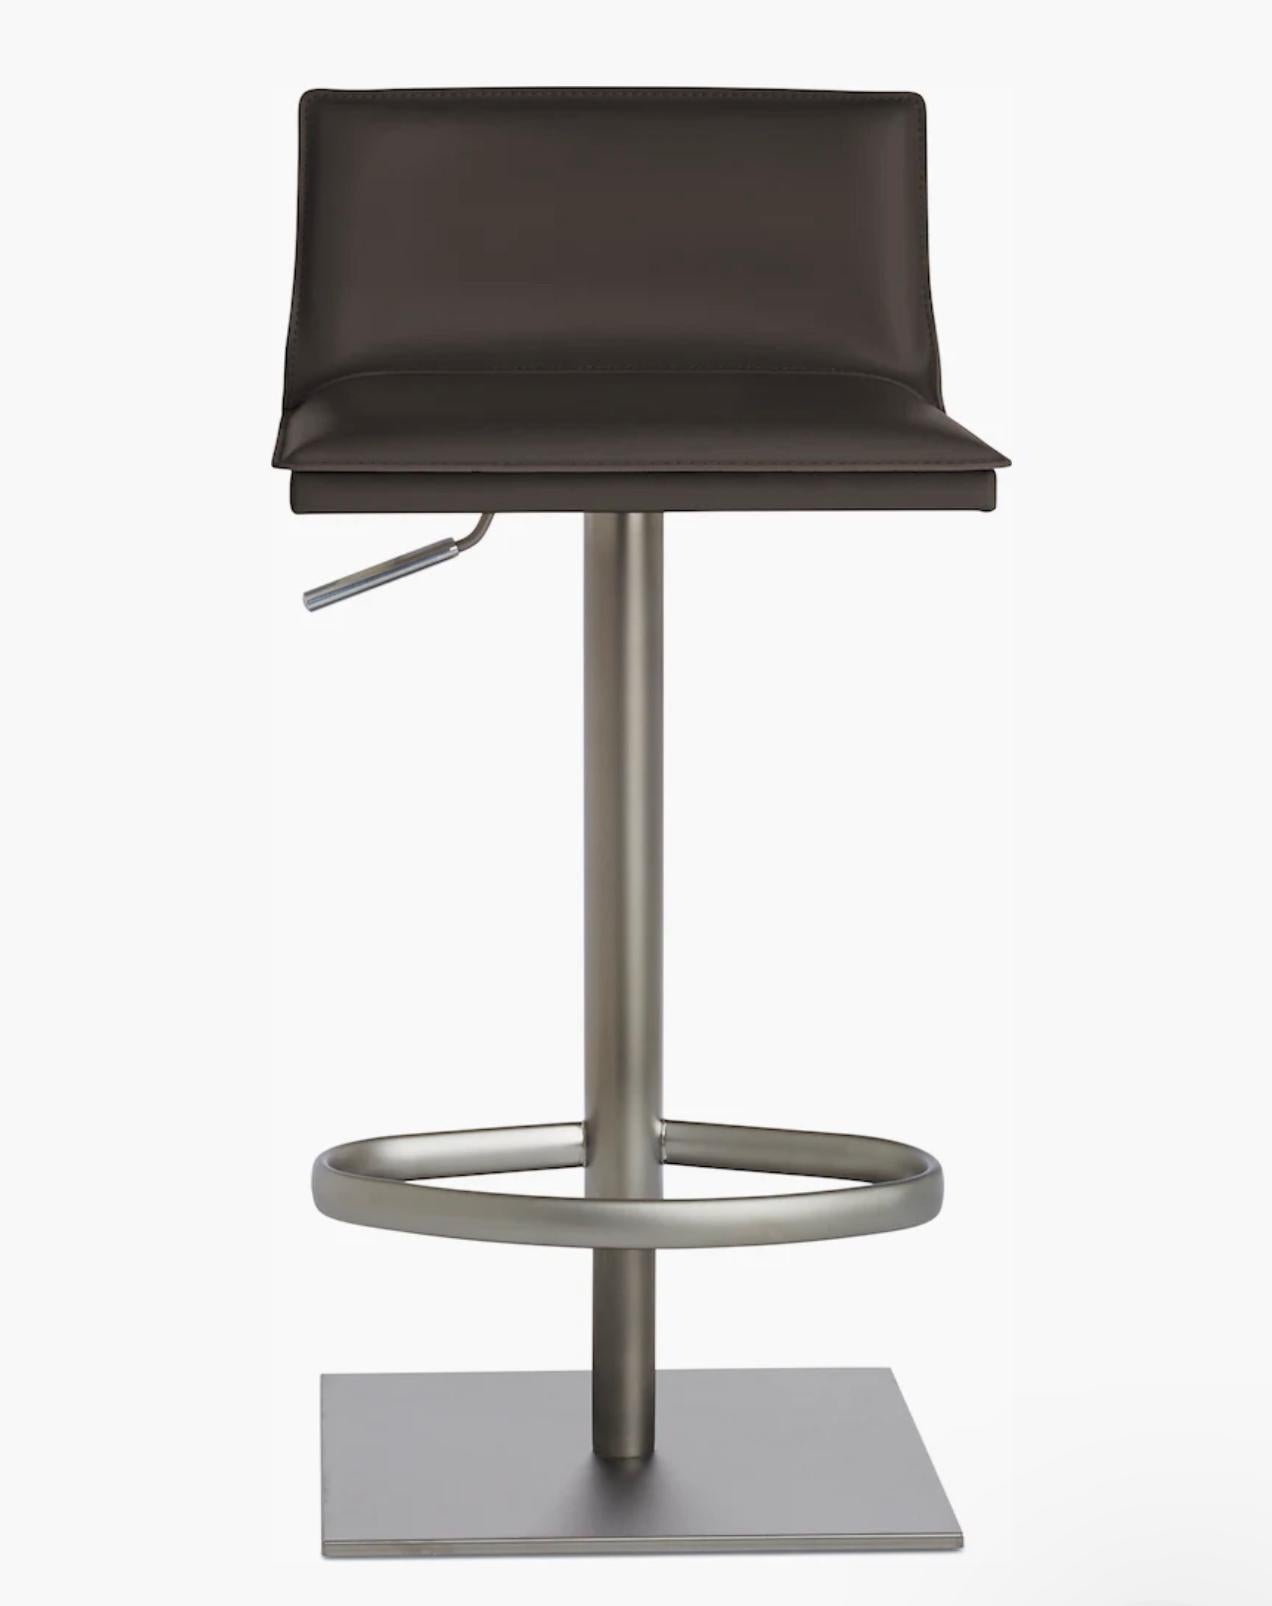 Bottega Piston bar stool by Renzo Fauciglietti & Graziella Bianchi.

Up to 4 (four) available; priced individually.

Chocolate brown leather with swiveling brushed stainless steel bases.

Made in Italy, circa 2010. 

Dimensions:
Height 38.2”
Width